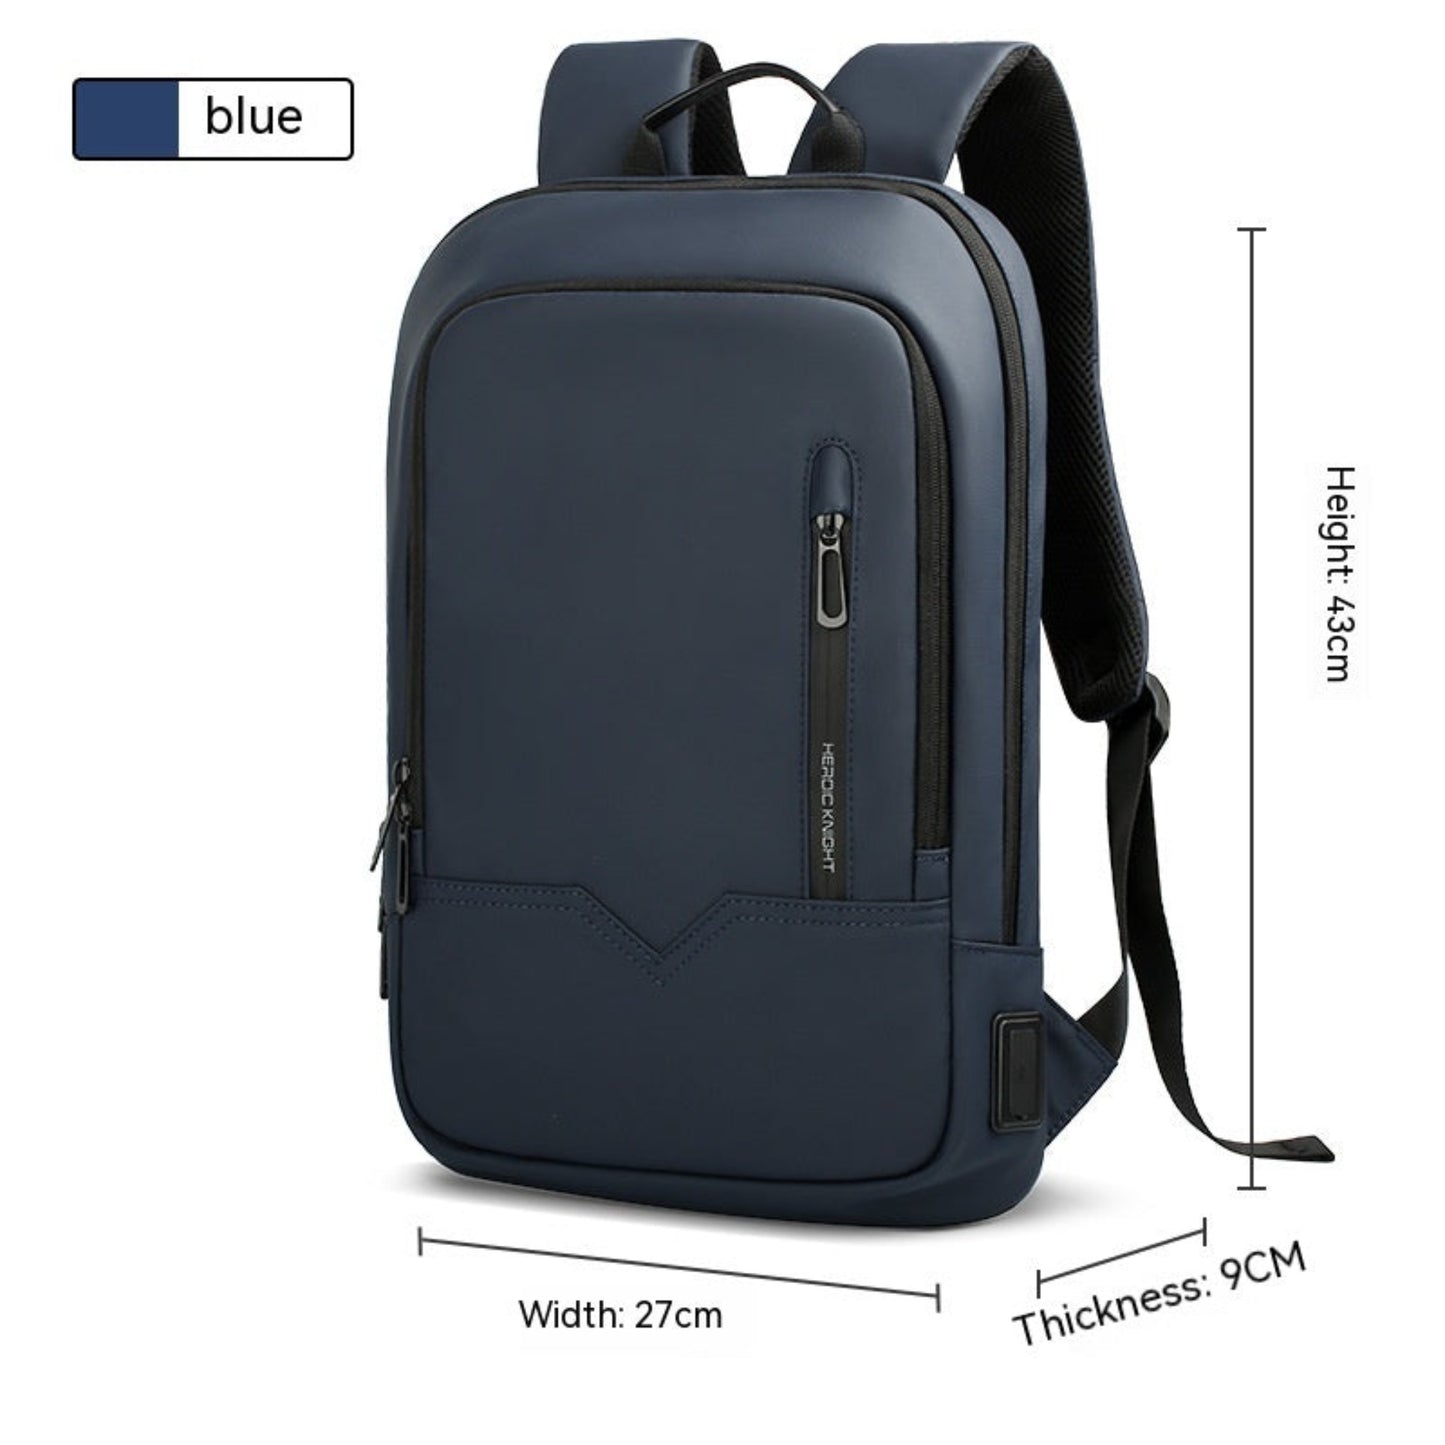 Heroic Knight Business Backpack For Men-Fashion&Accessories-Stay organized and stylish with this multifunctional Heroic Knight backpack. Ideal for business commuters with a USB interface and sleek design.-okidokibro